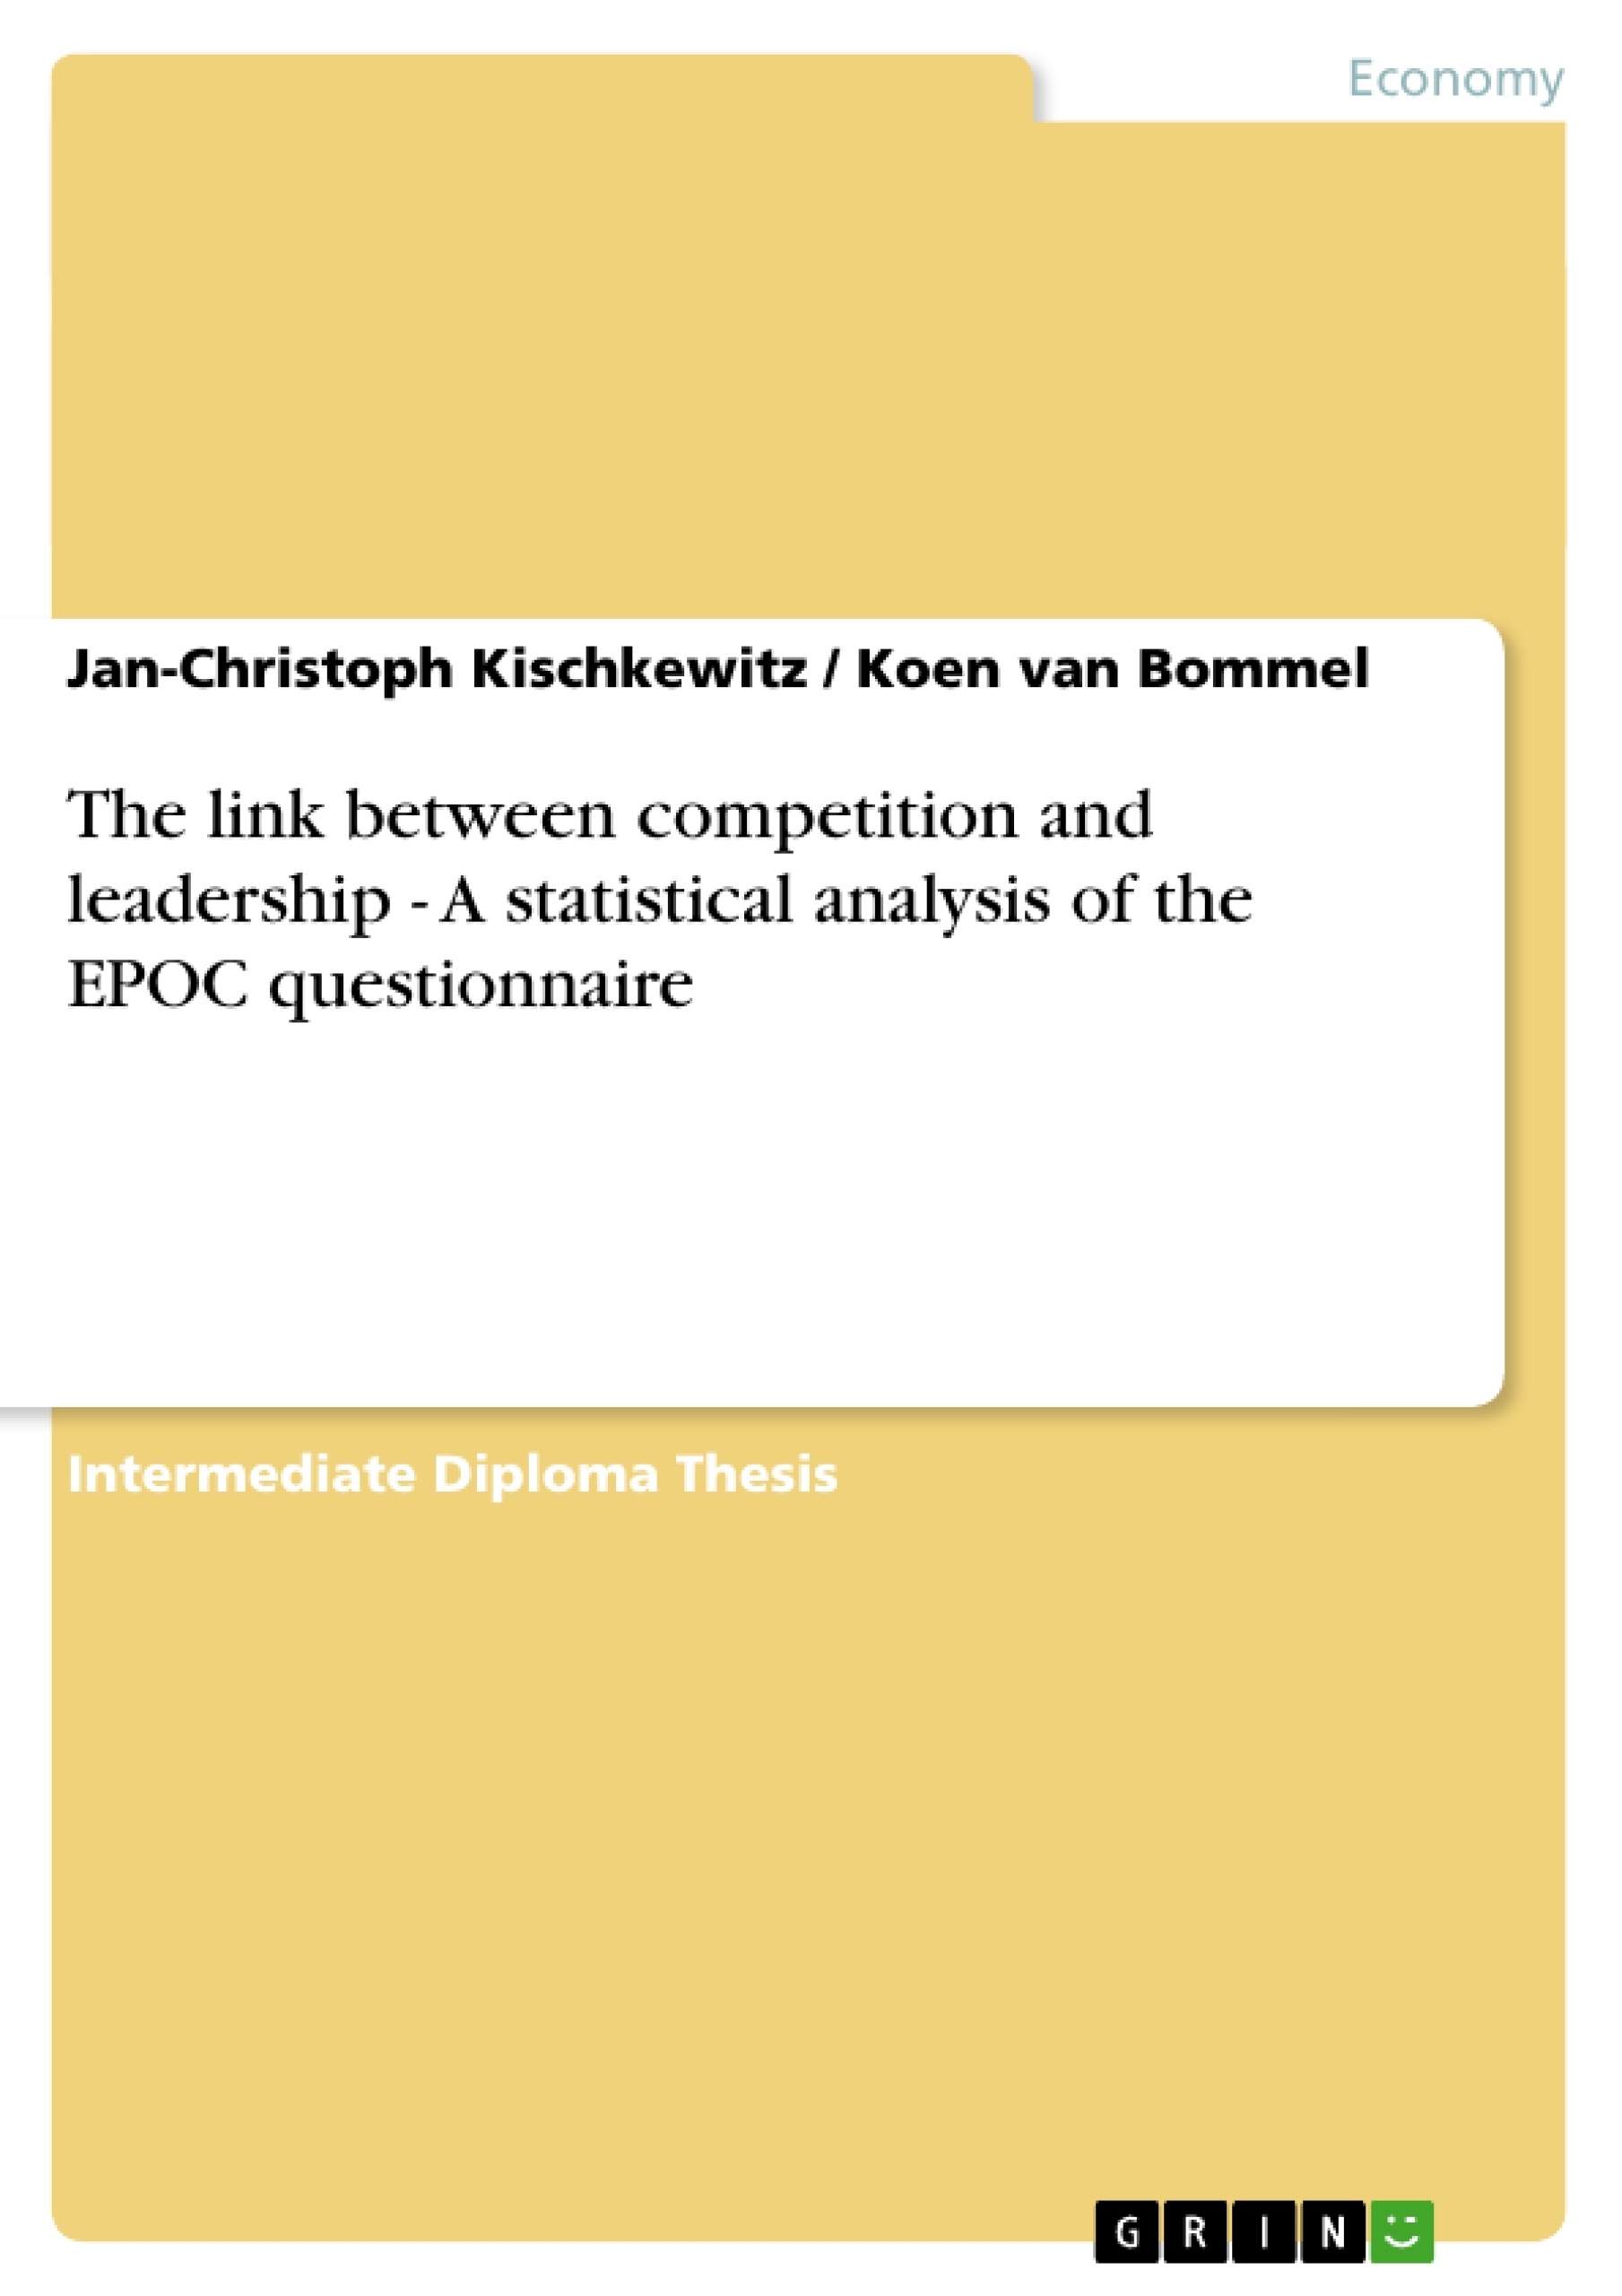 Title: The link between competition and leadership - A statistical analysis of the EPOC questionnaire